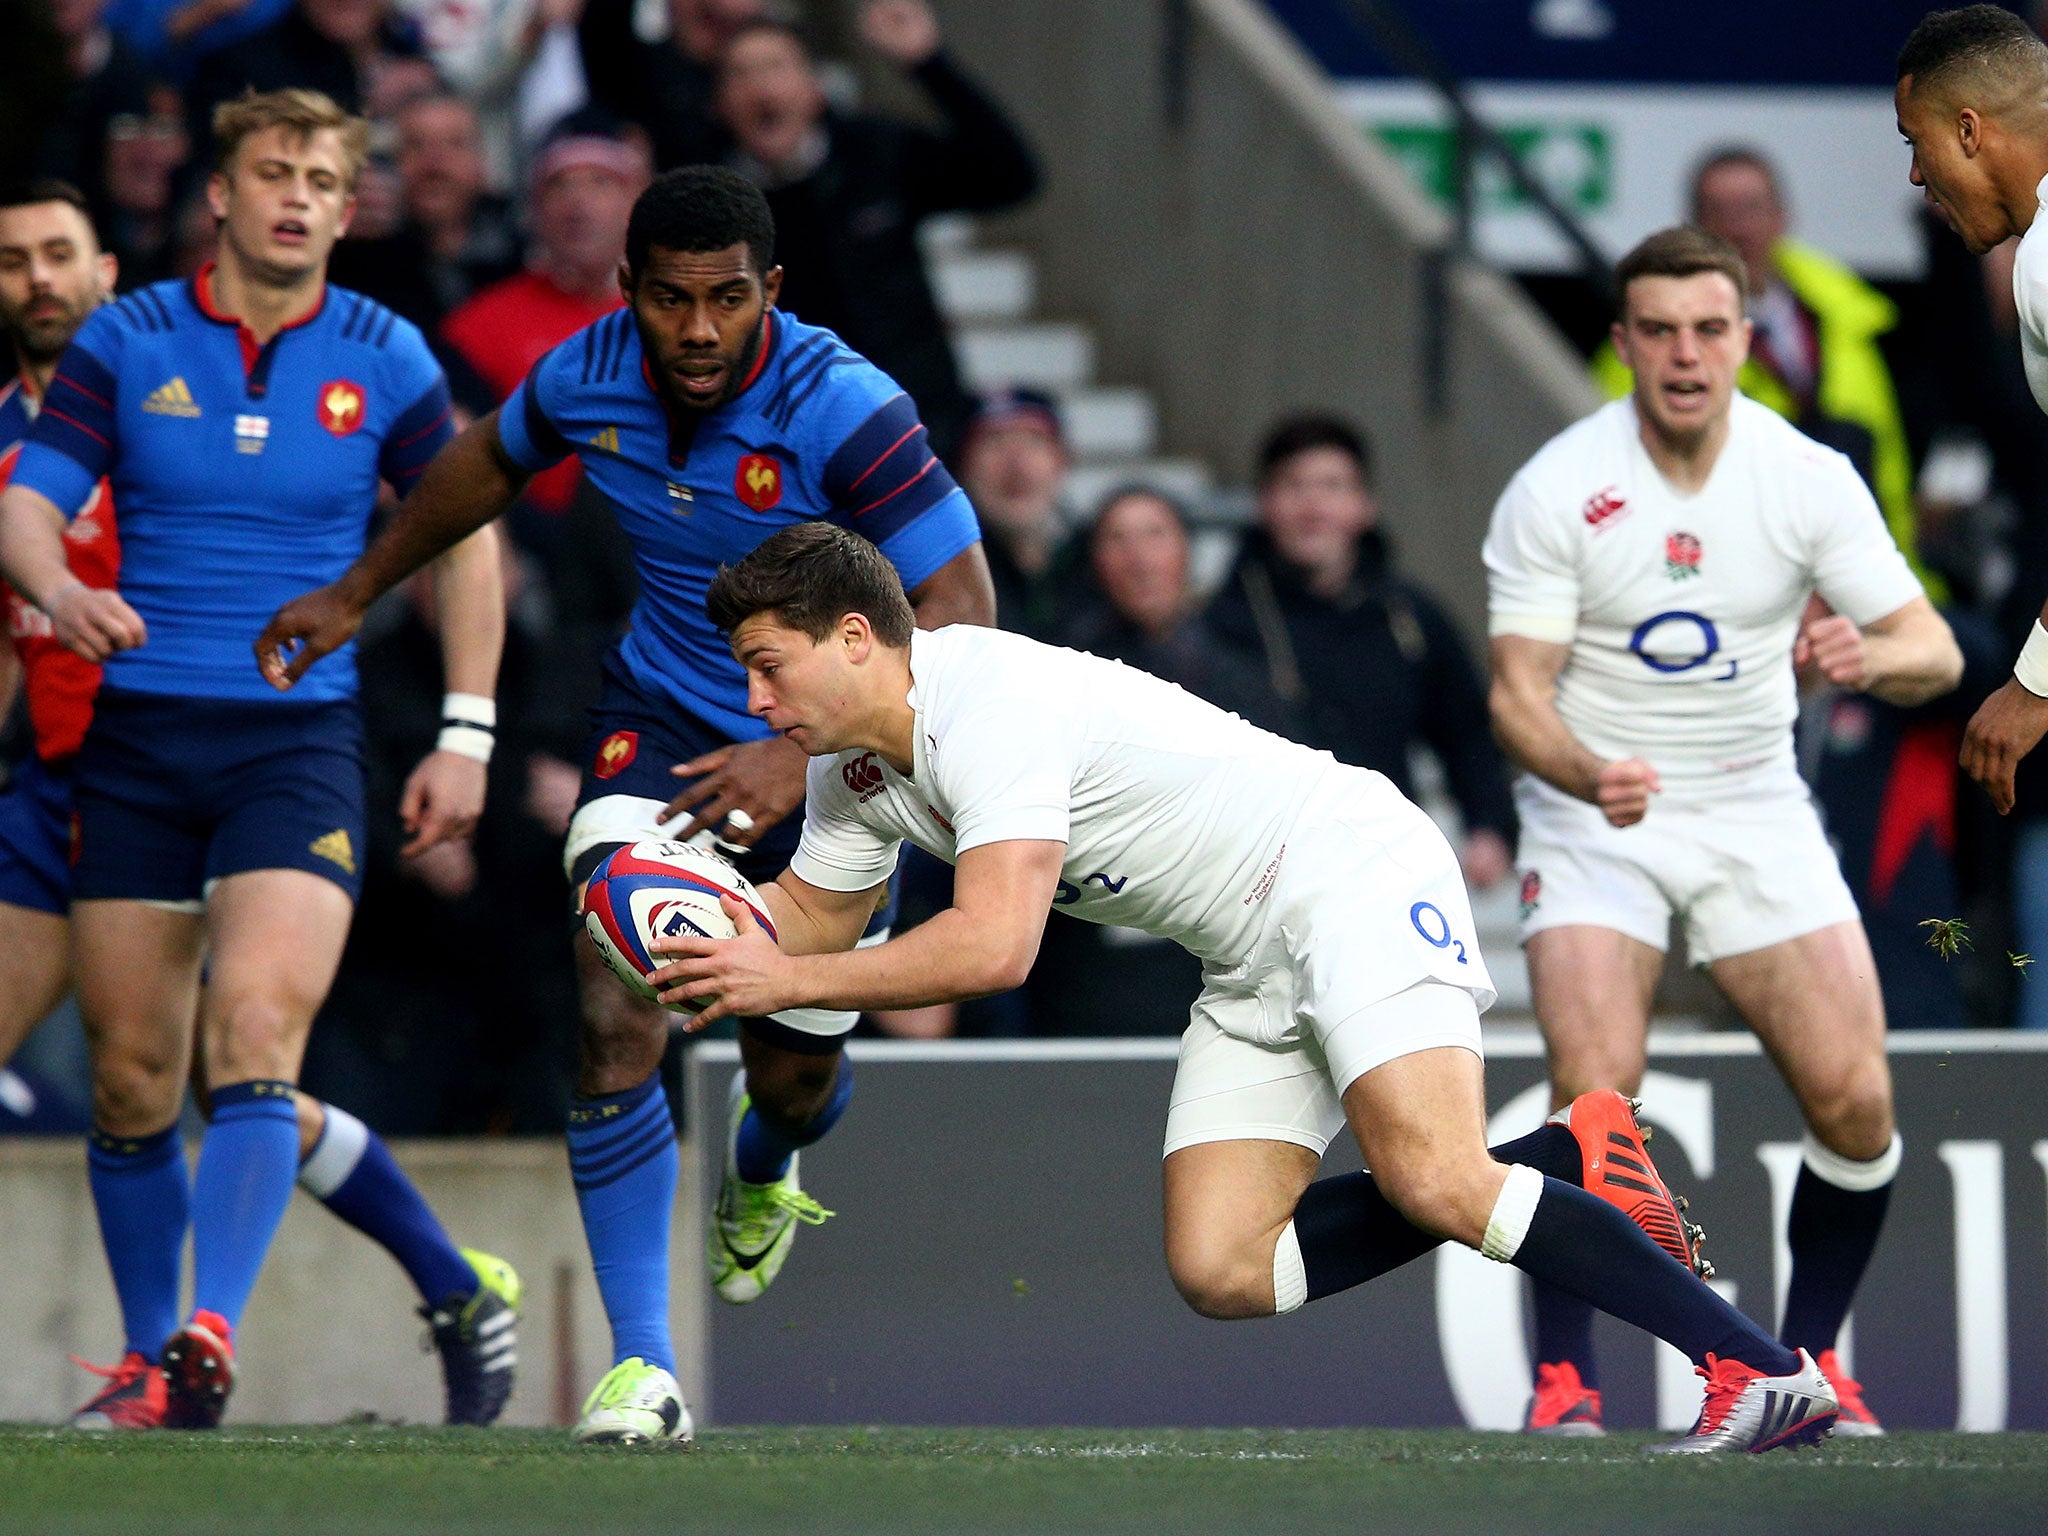 Ben Youngs scores for England